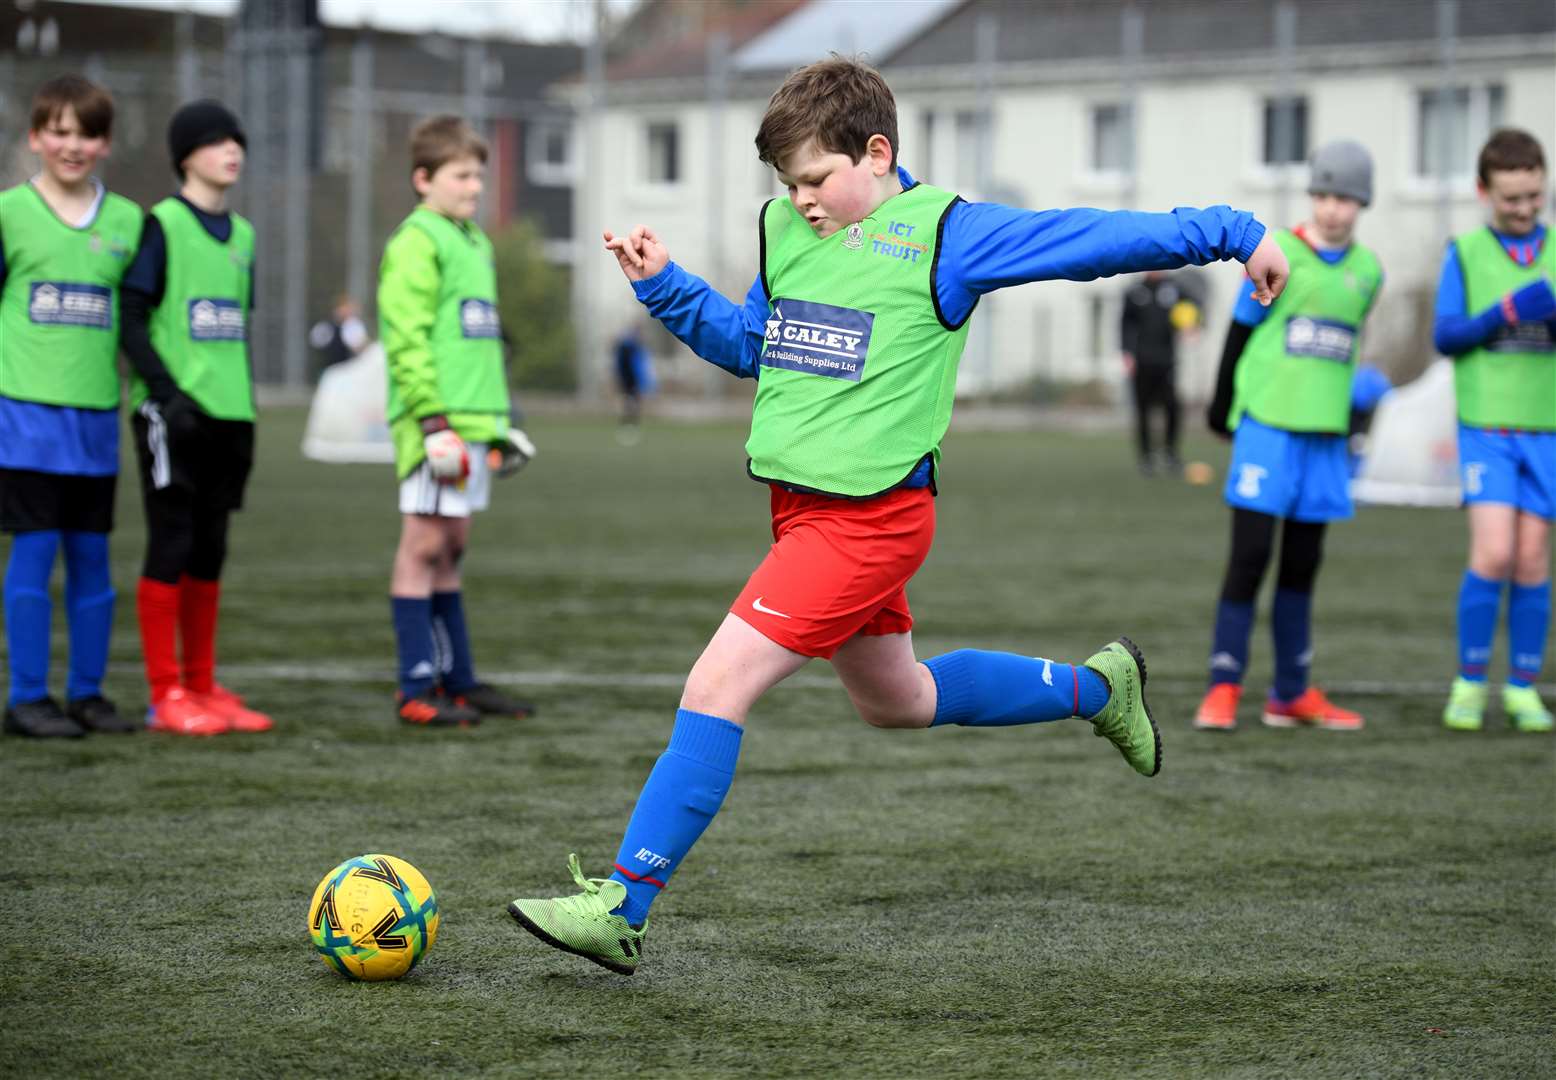 Caley Thistle Easter Camp at Millburn Academy: Trying to score a goal.  Pictured: James Mackenzie.